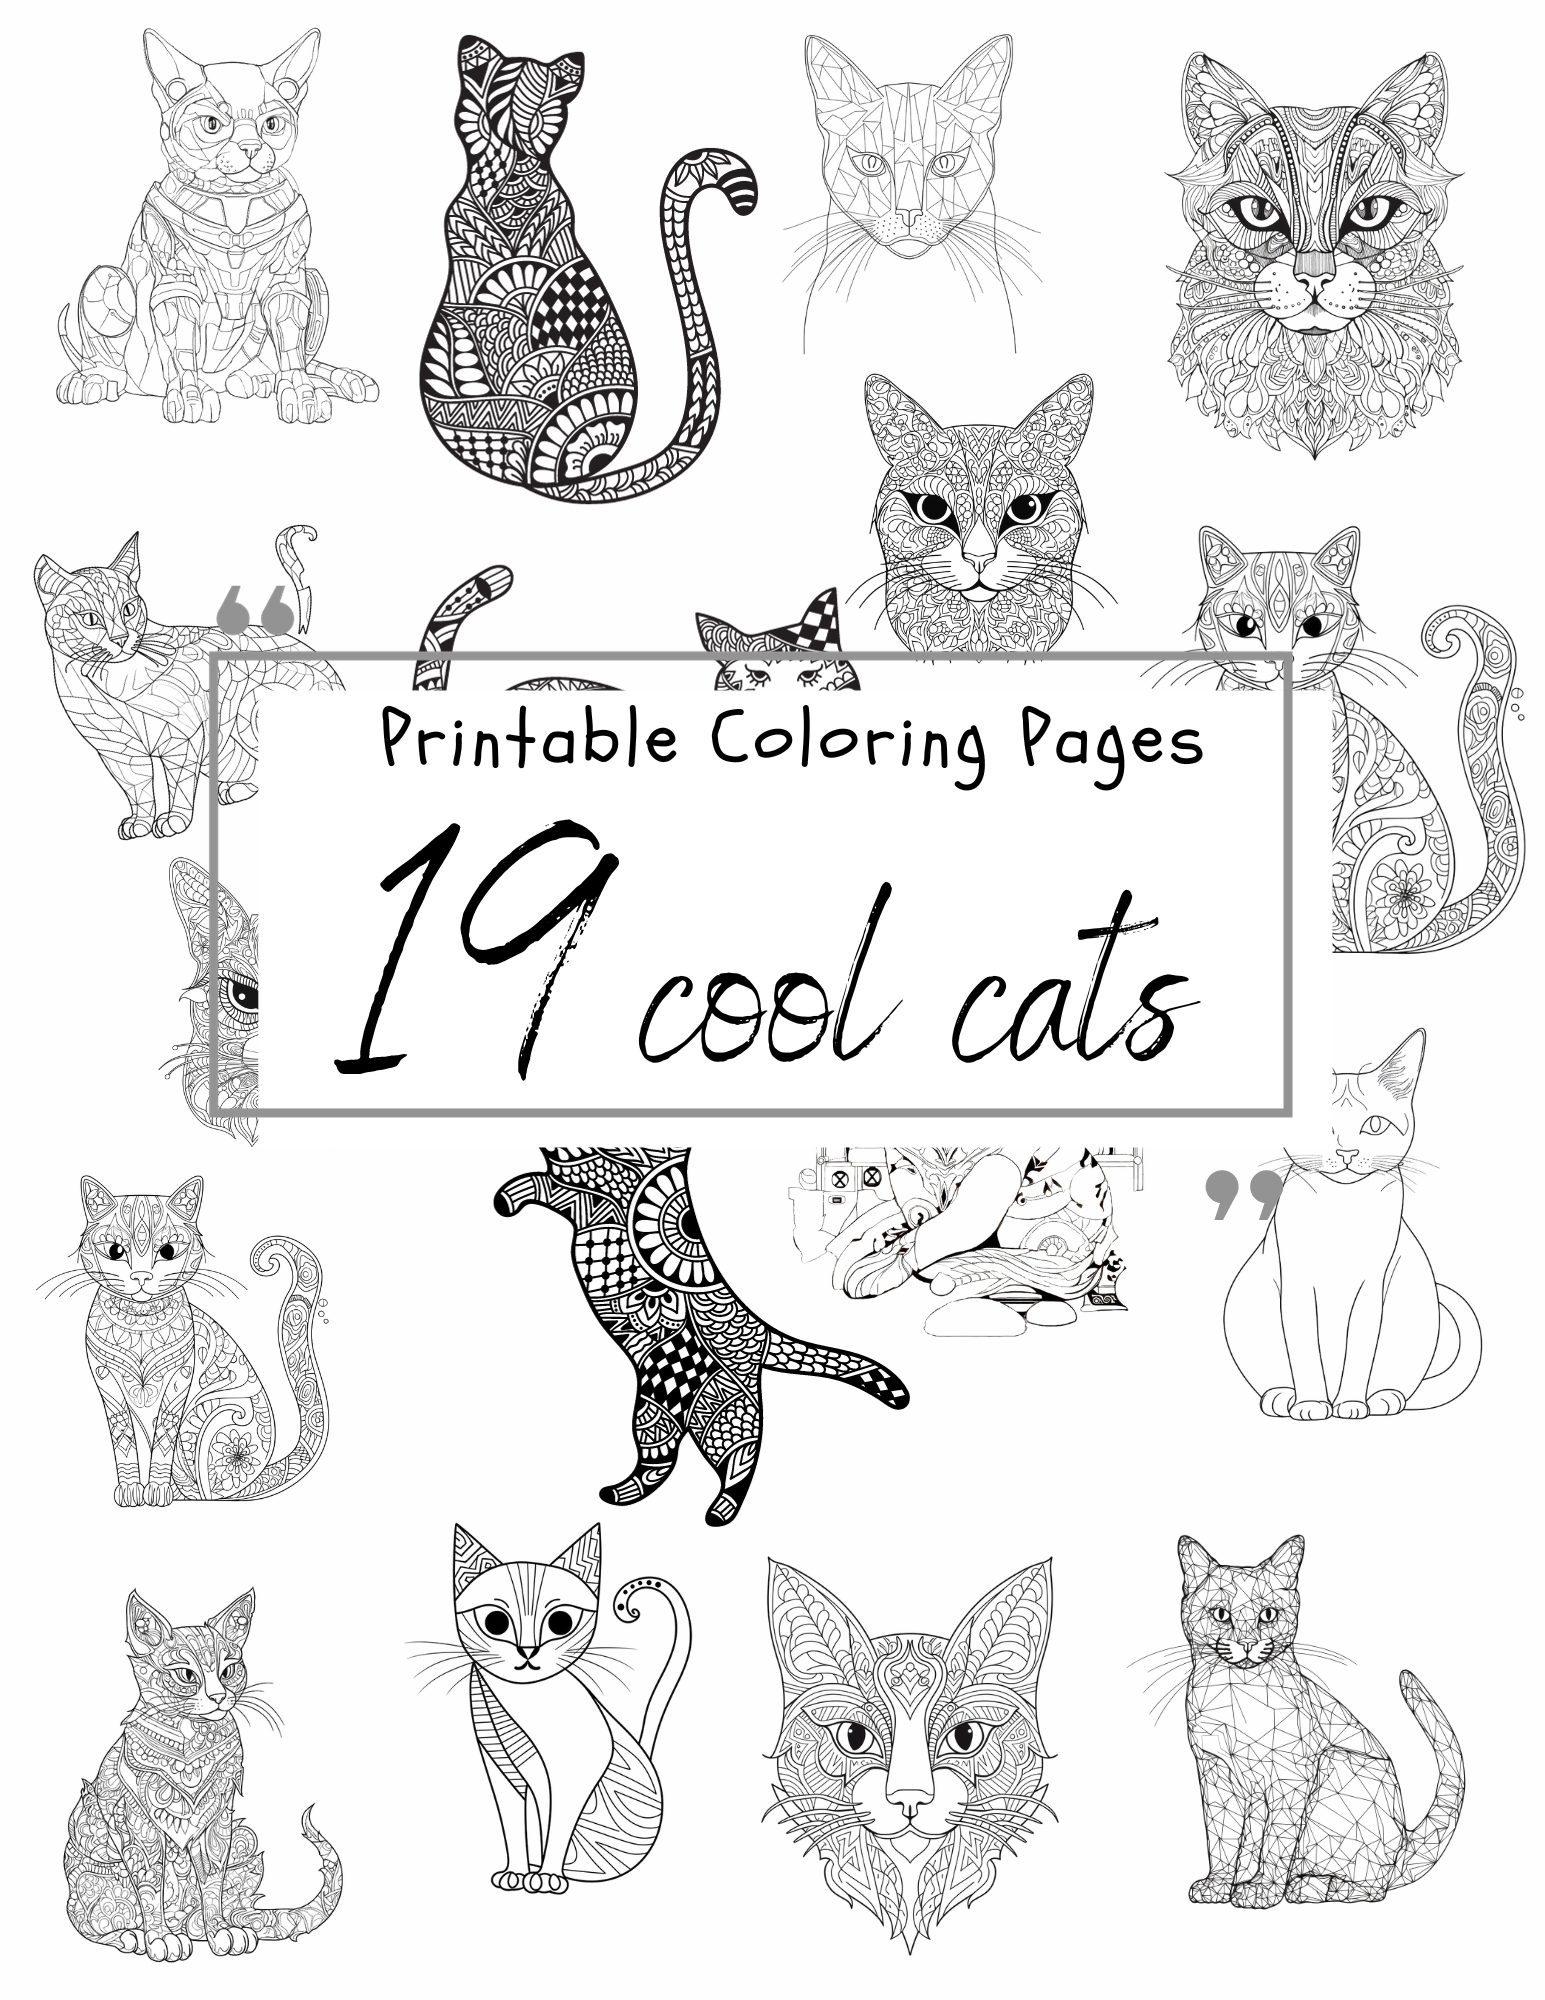 Adult Coloring book with stress relieving simple line patterns -  shop.nil-tech